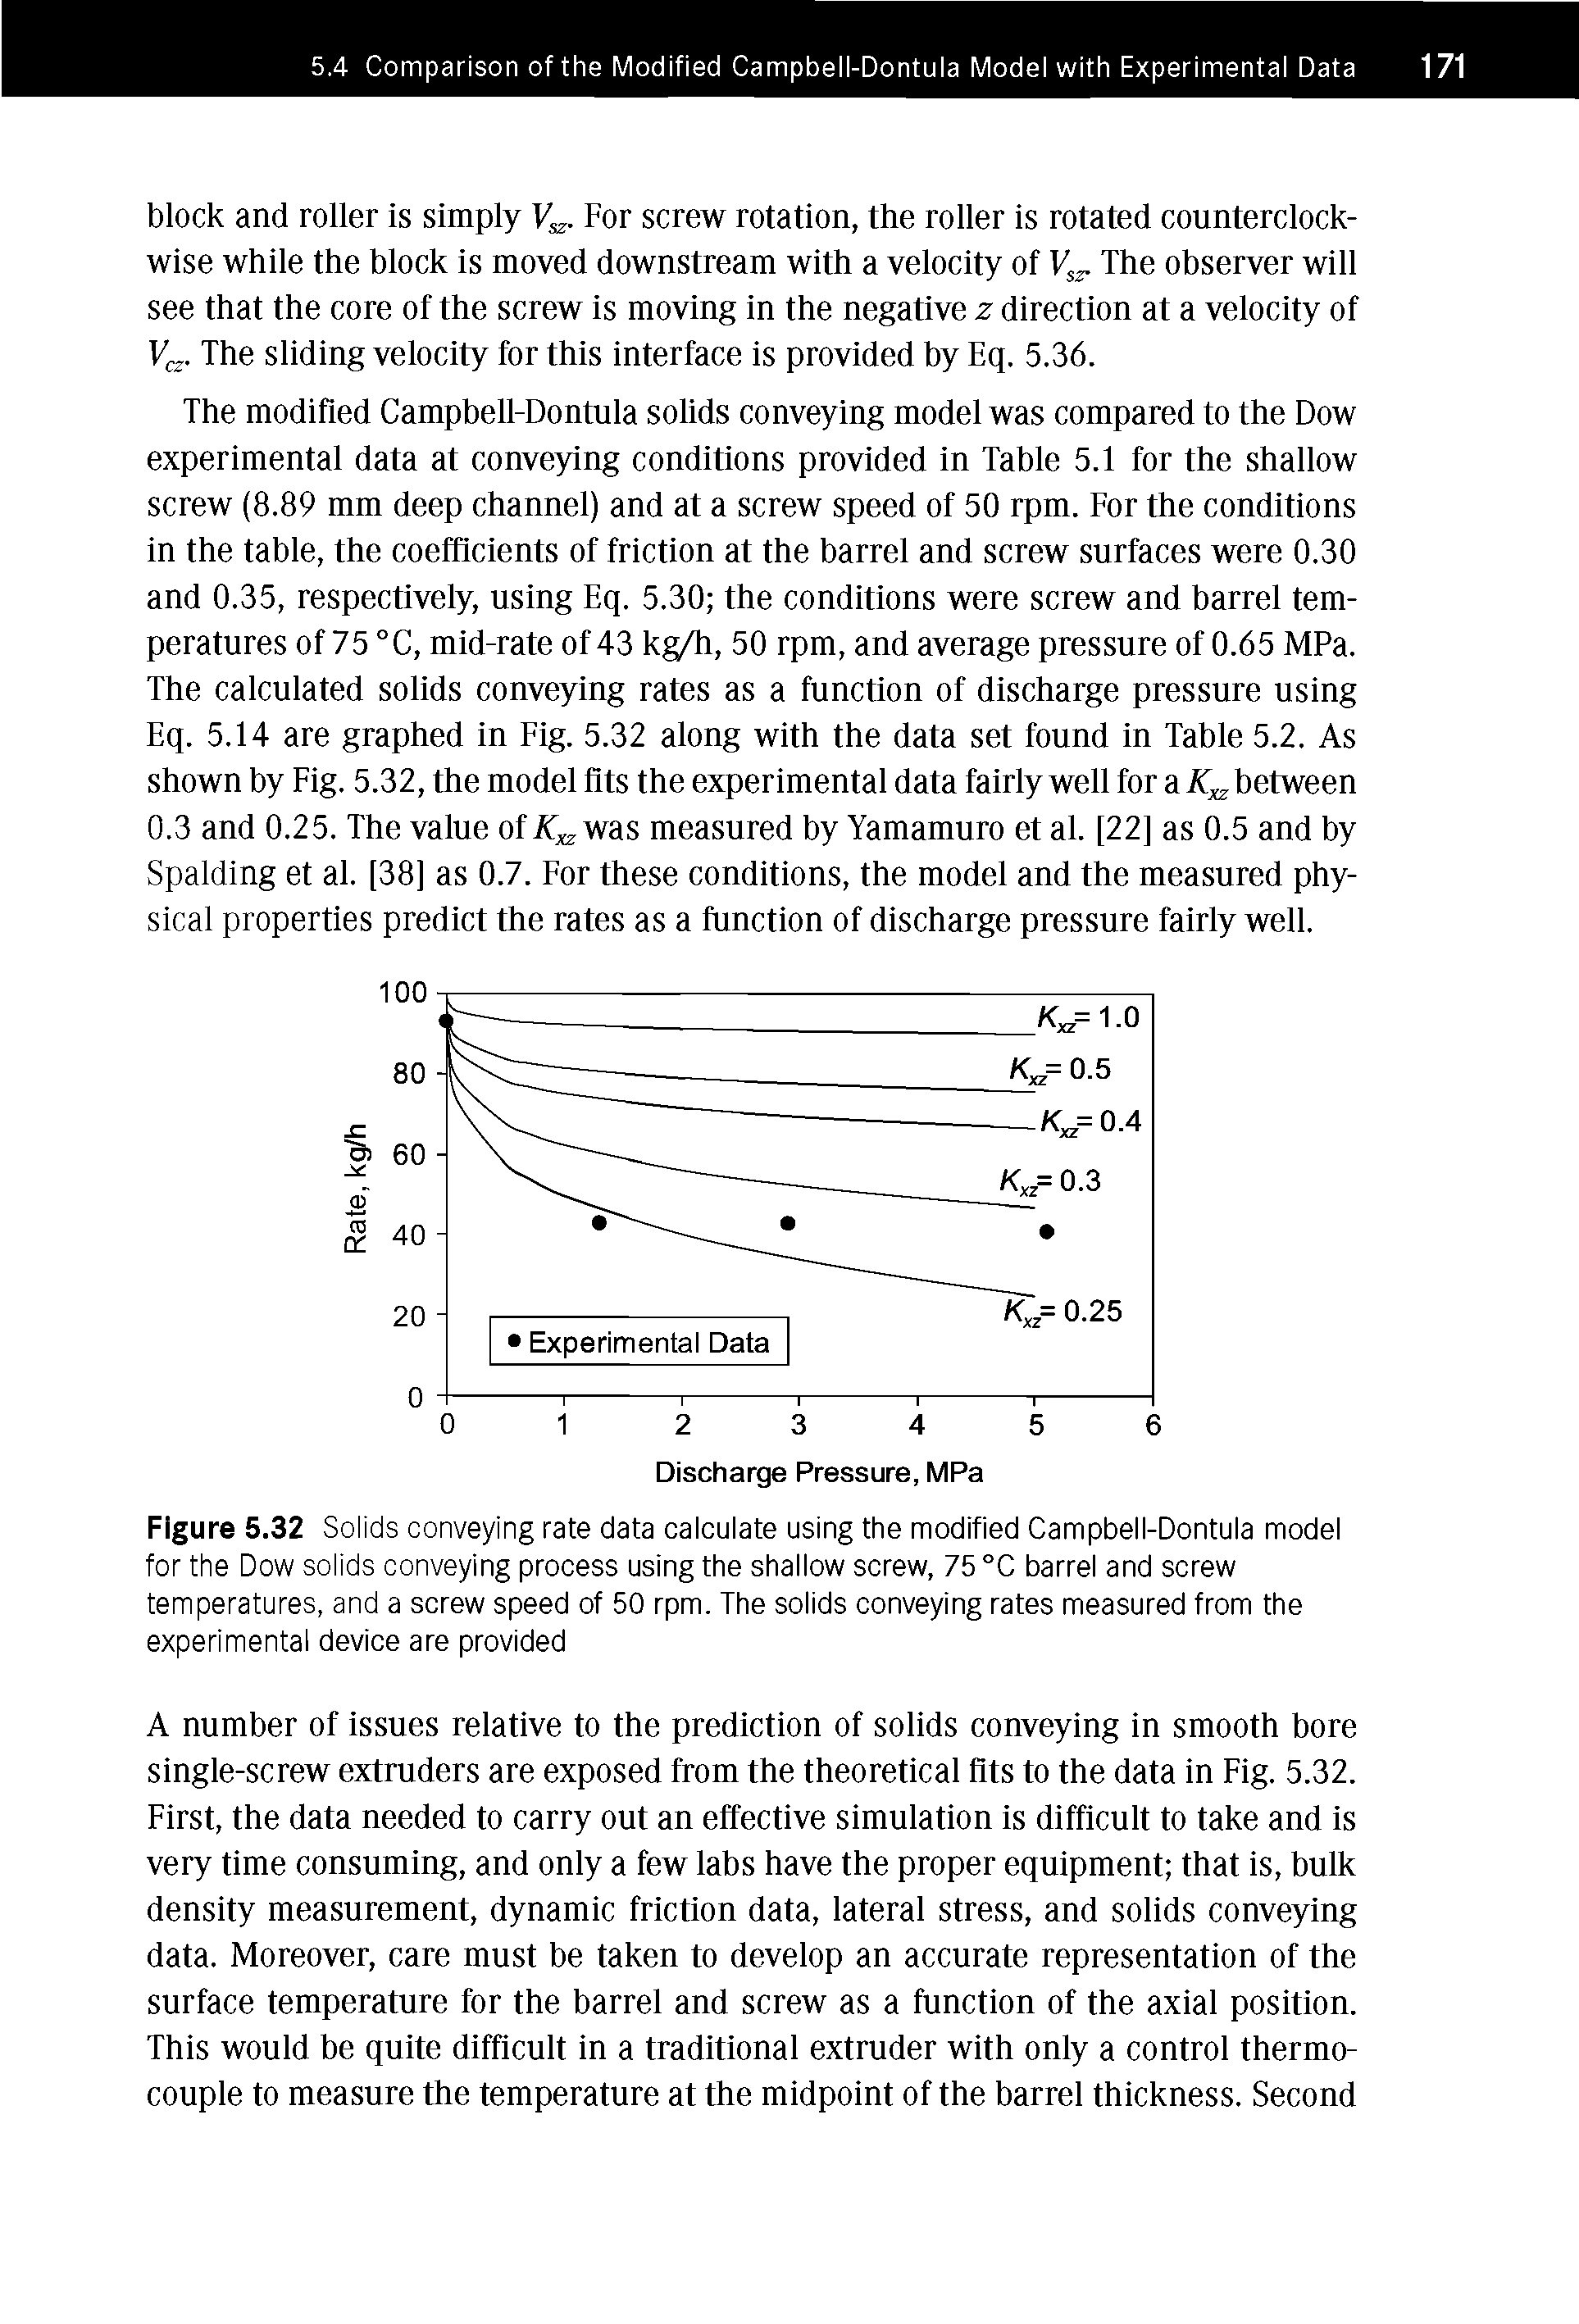 Figure 5.32 Solids conveying rate data calculate using the modified Campbell-Dontula model for the Dow solids conveying process using the shallow screw, 75 °C barrel and screw temperatures, and a screw speed of 50 rpm. The solids conveying rates measured from the experimental device are provided...